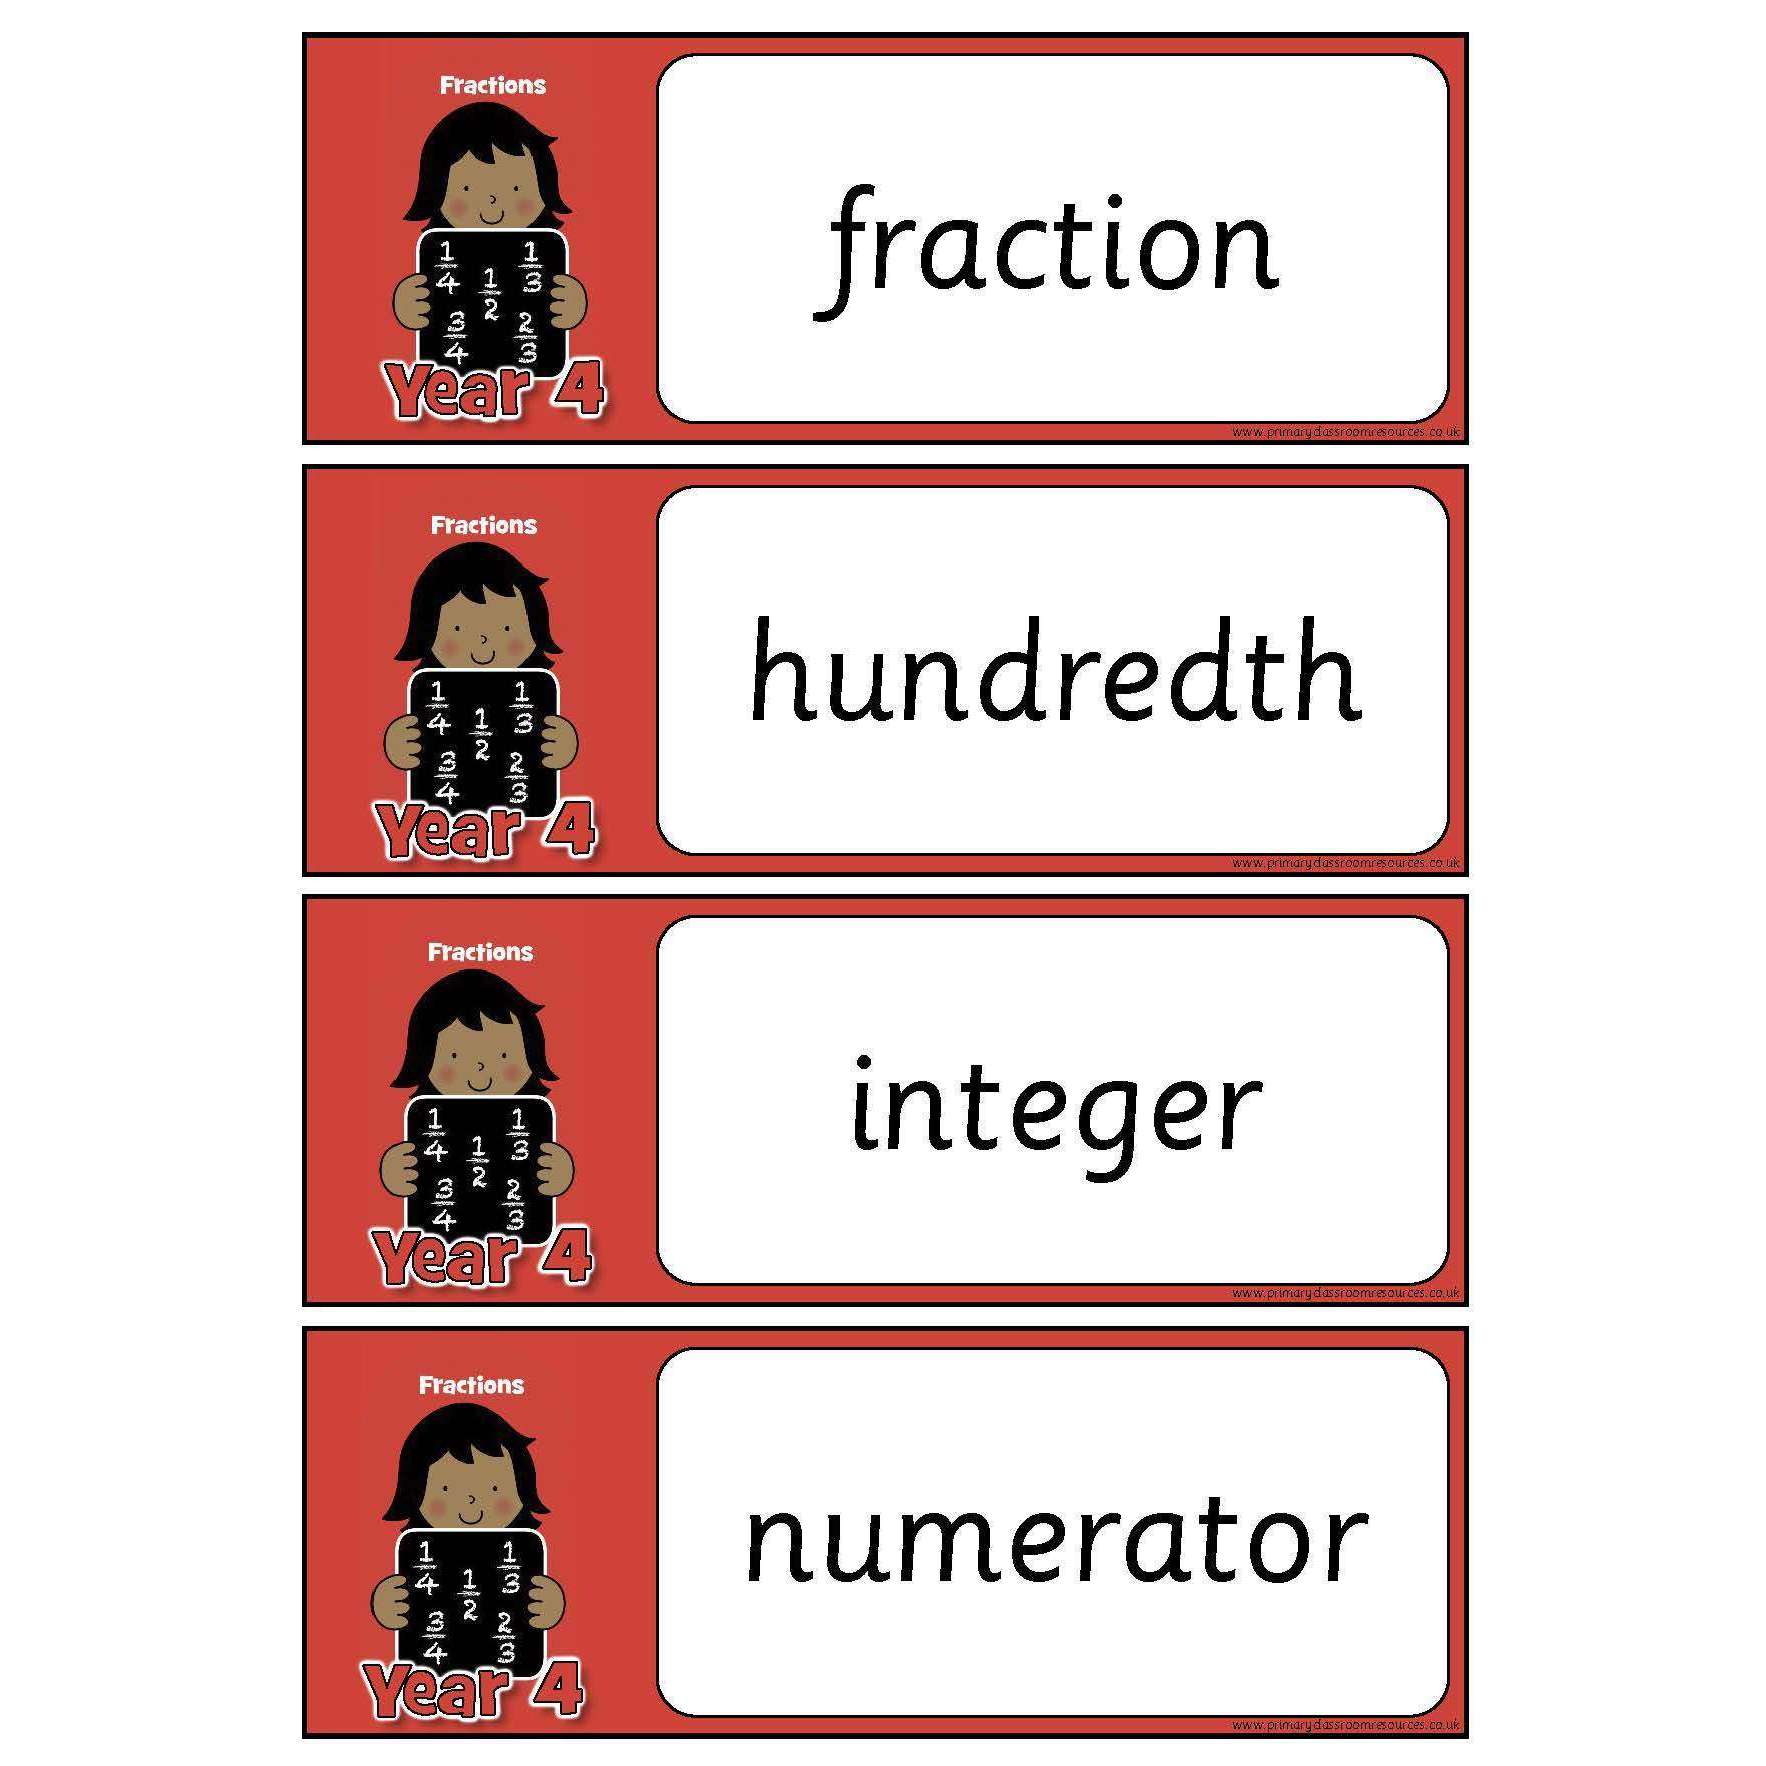 Year 4 Maths Vocabulary - Fractions:Primary Classroom Resources